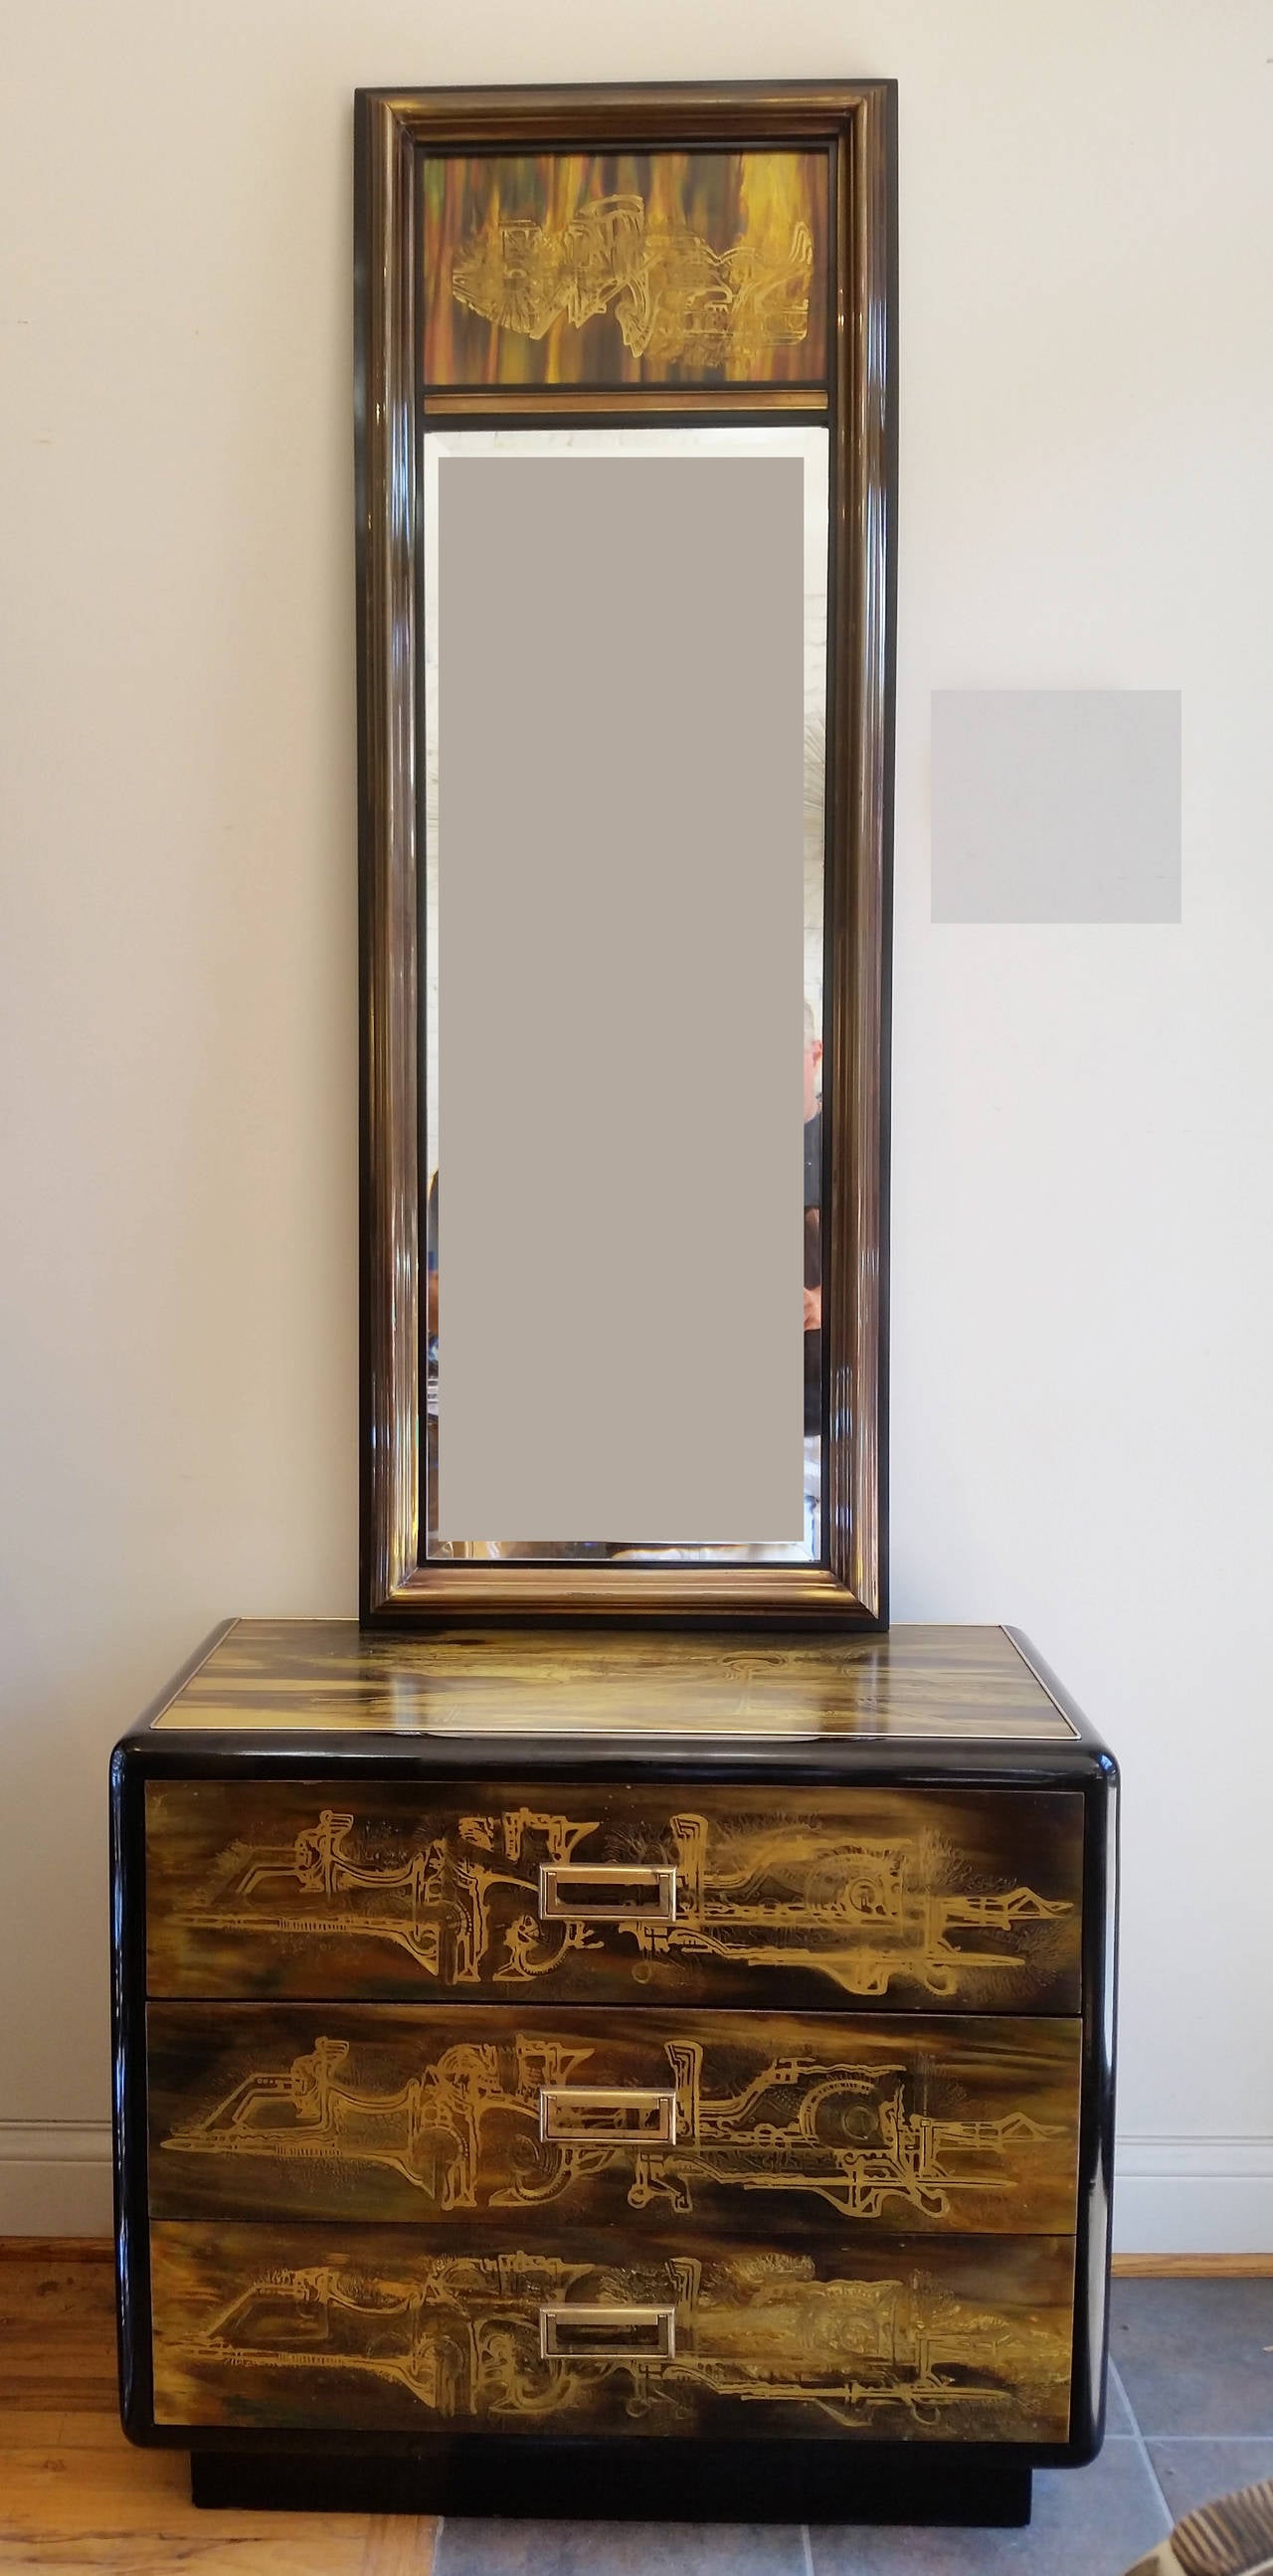 A brass long beveled mirror and three drawers cabinet by noted Mastercraft artist
Bernhard Rohne. Its top and sides are clad in iconic
Rohne acid etched panels. The corners are black lacquered
radius edges. Would work well as a nightstand or entry